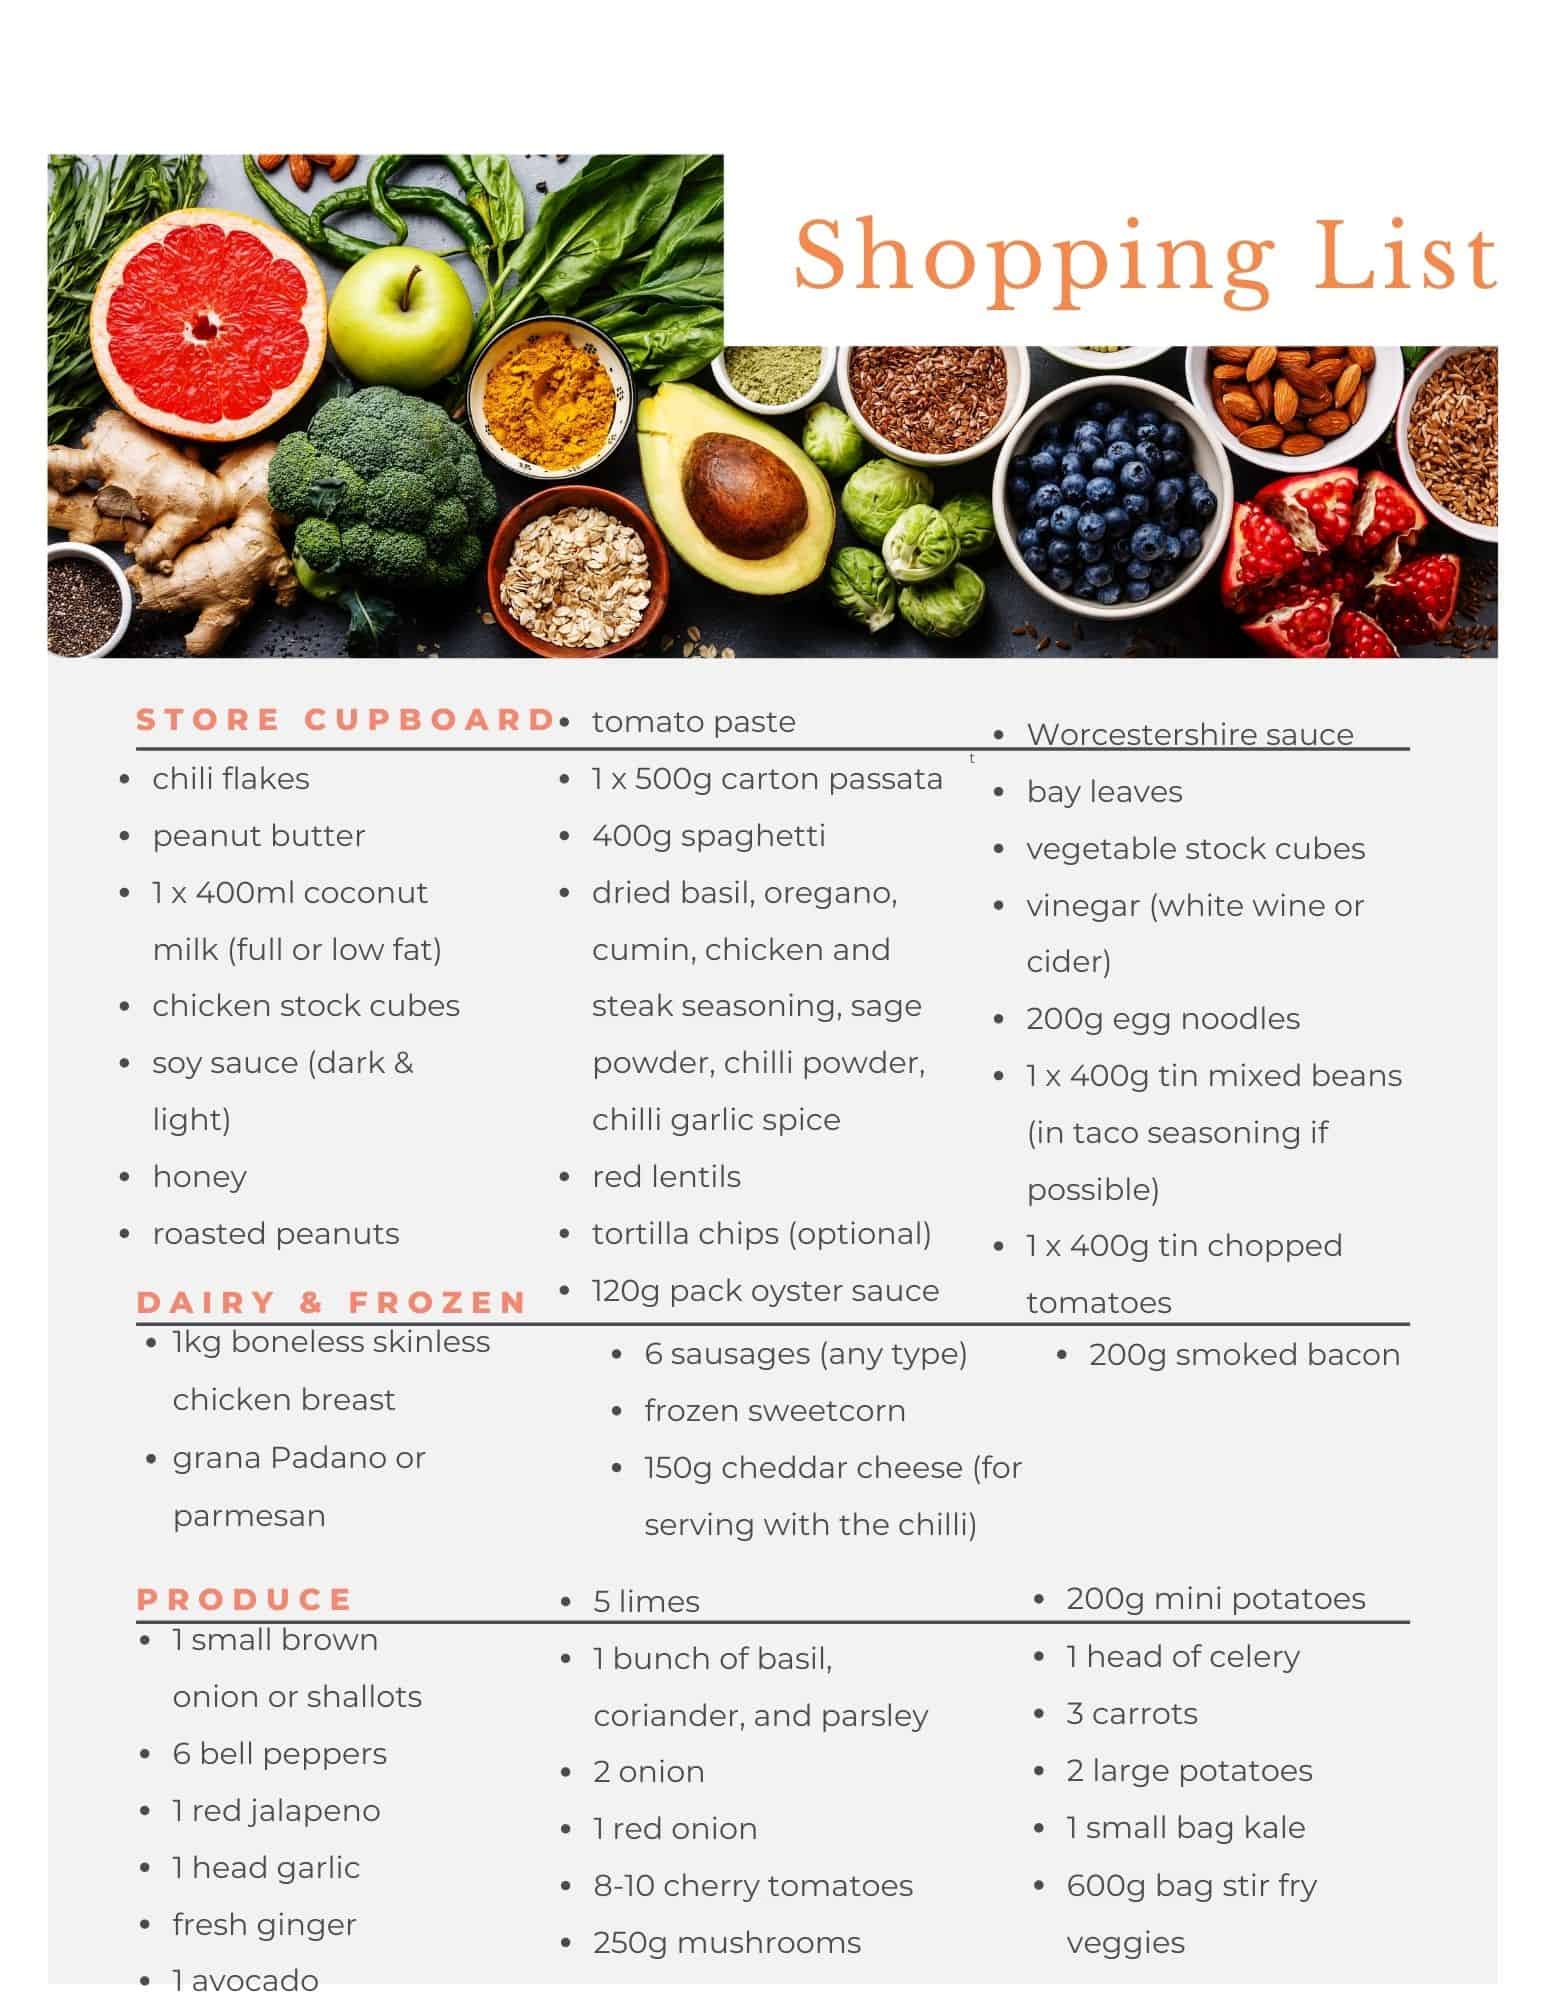 Budget meal plan free shopping list.